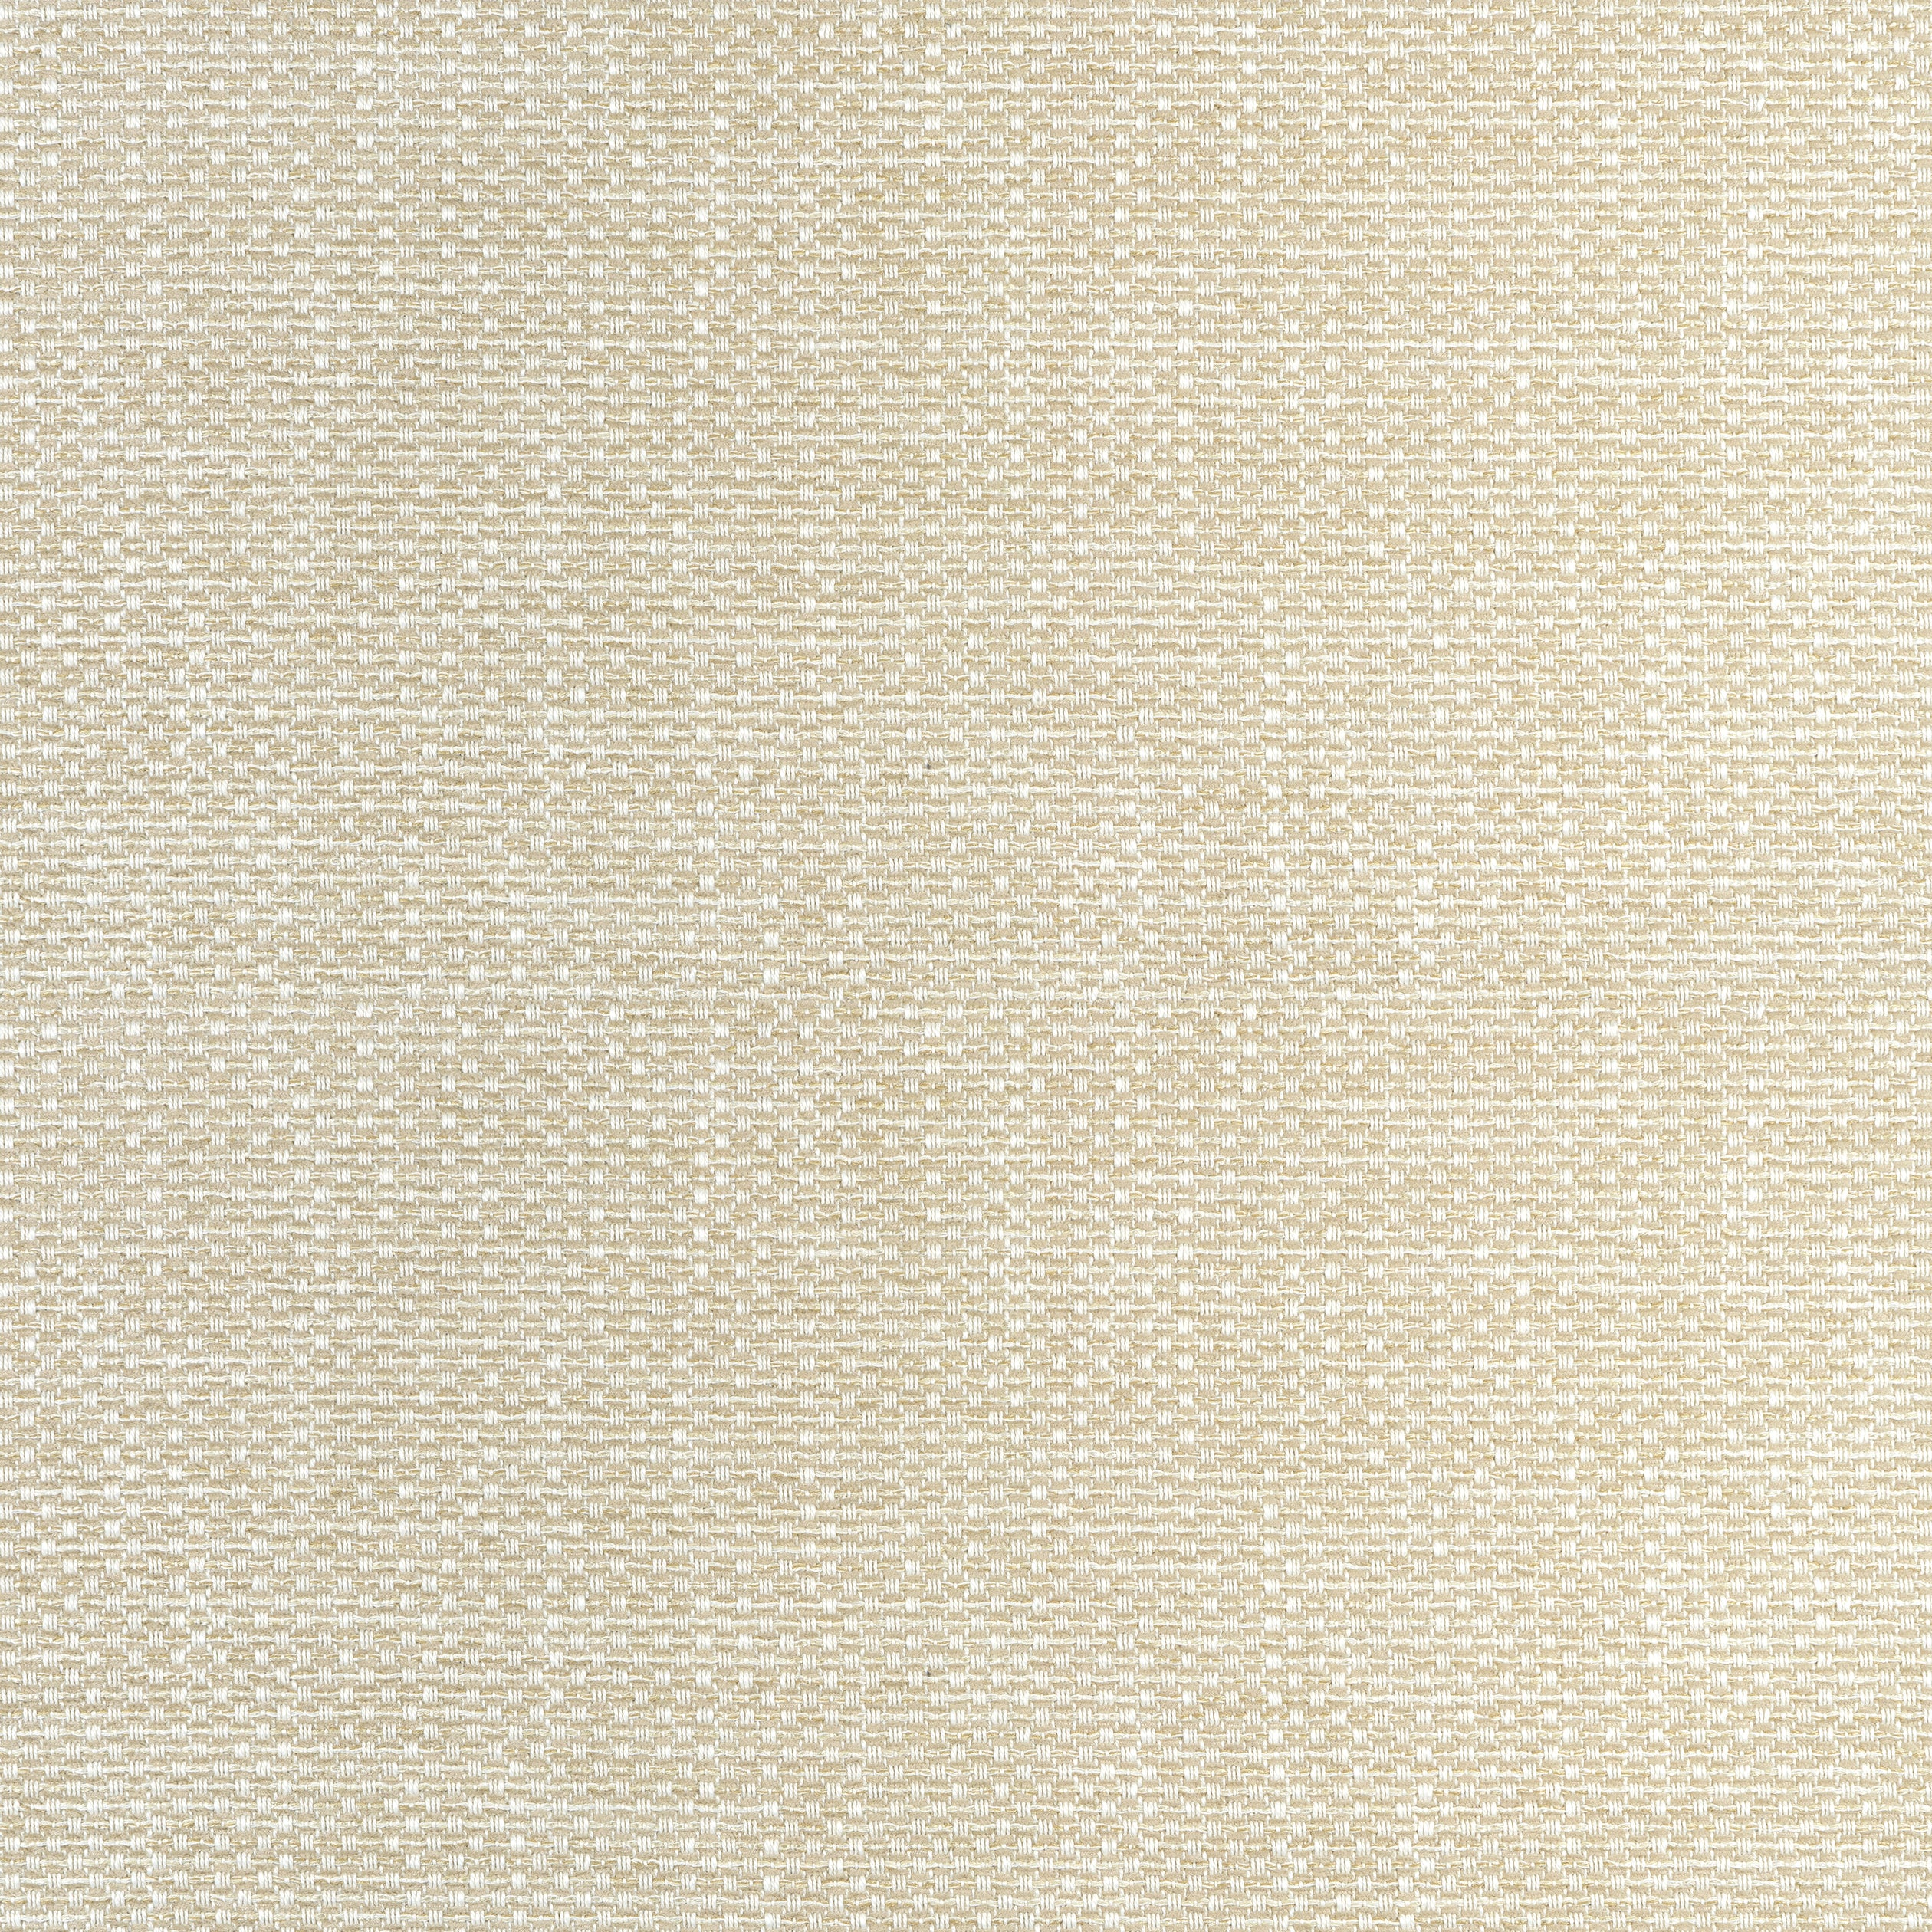 Cascade fabric in linen color - pattern number W75253 - by Thibaut in the Elements collection